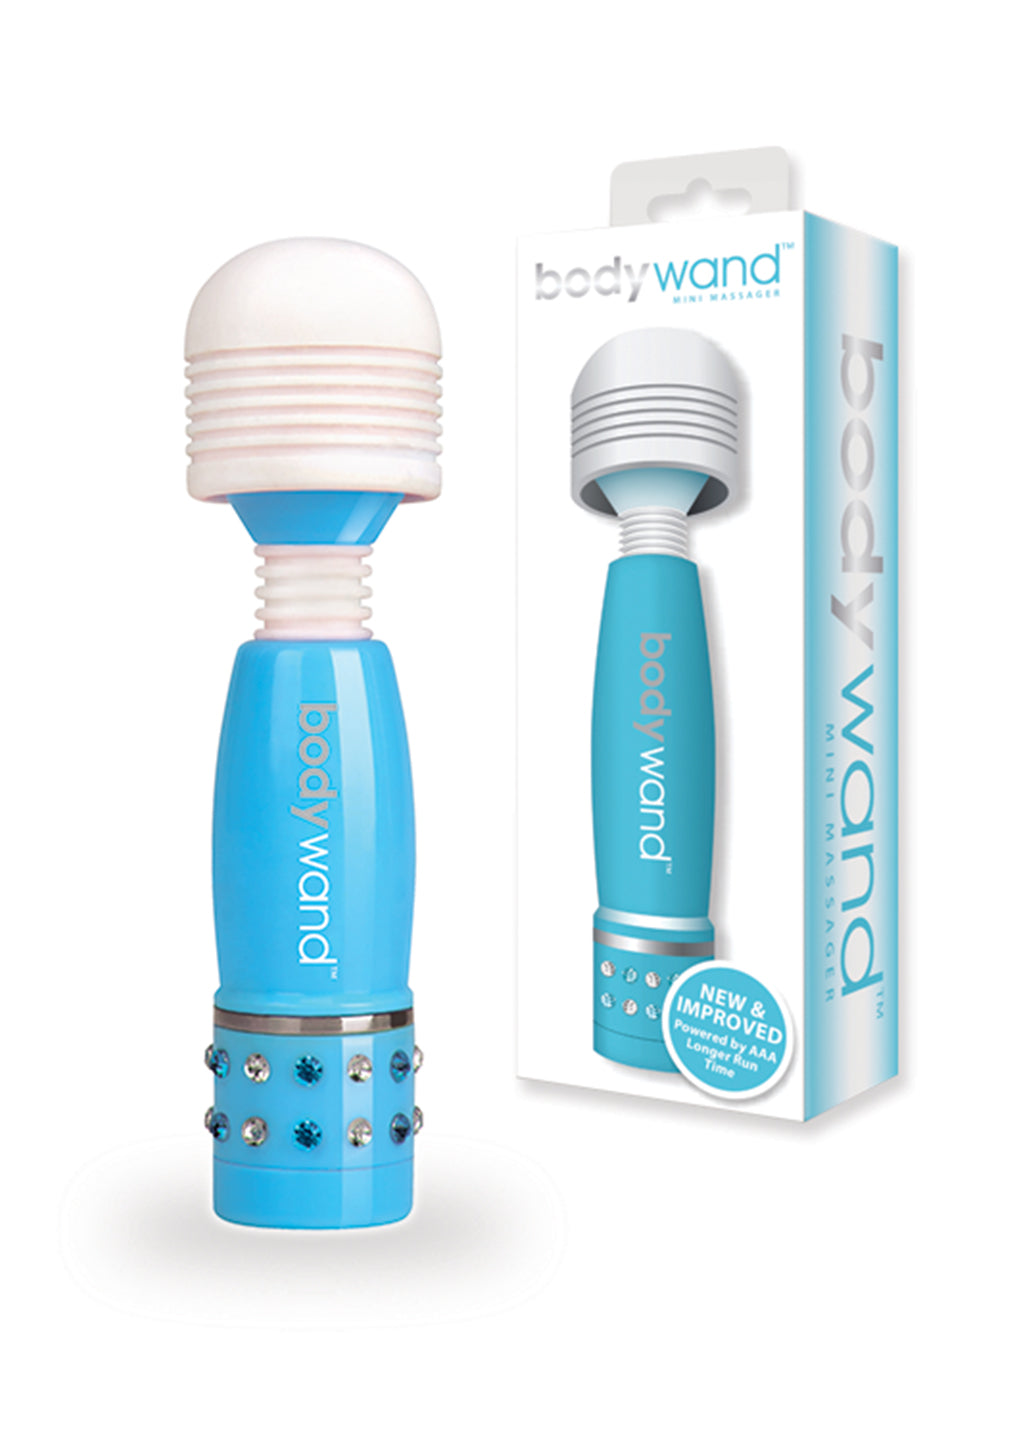 Battery-Powered Massagers by Bodywand